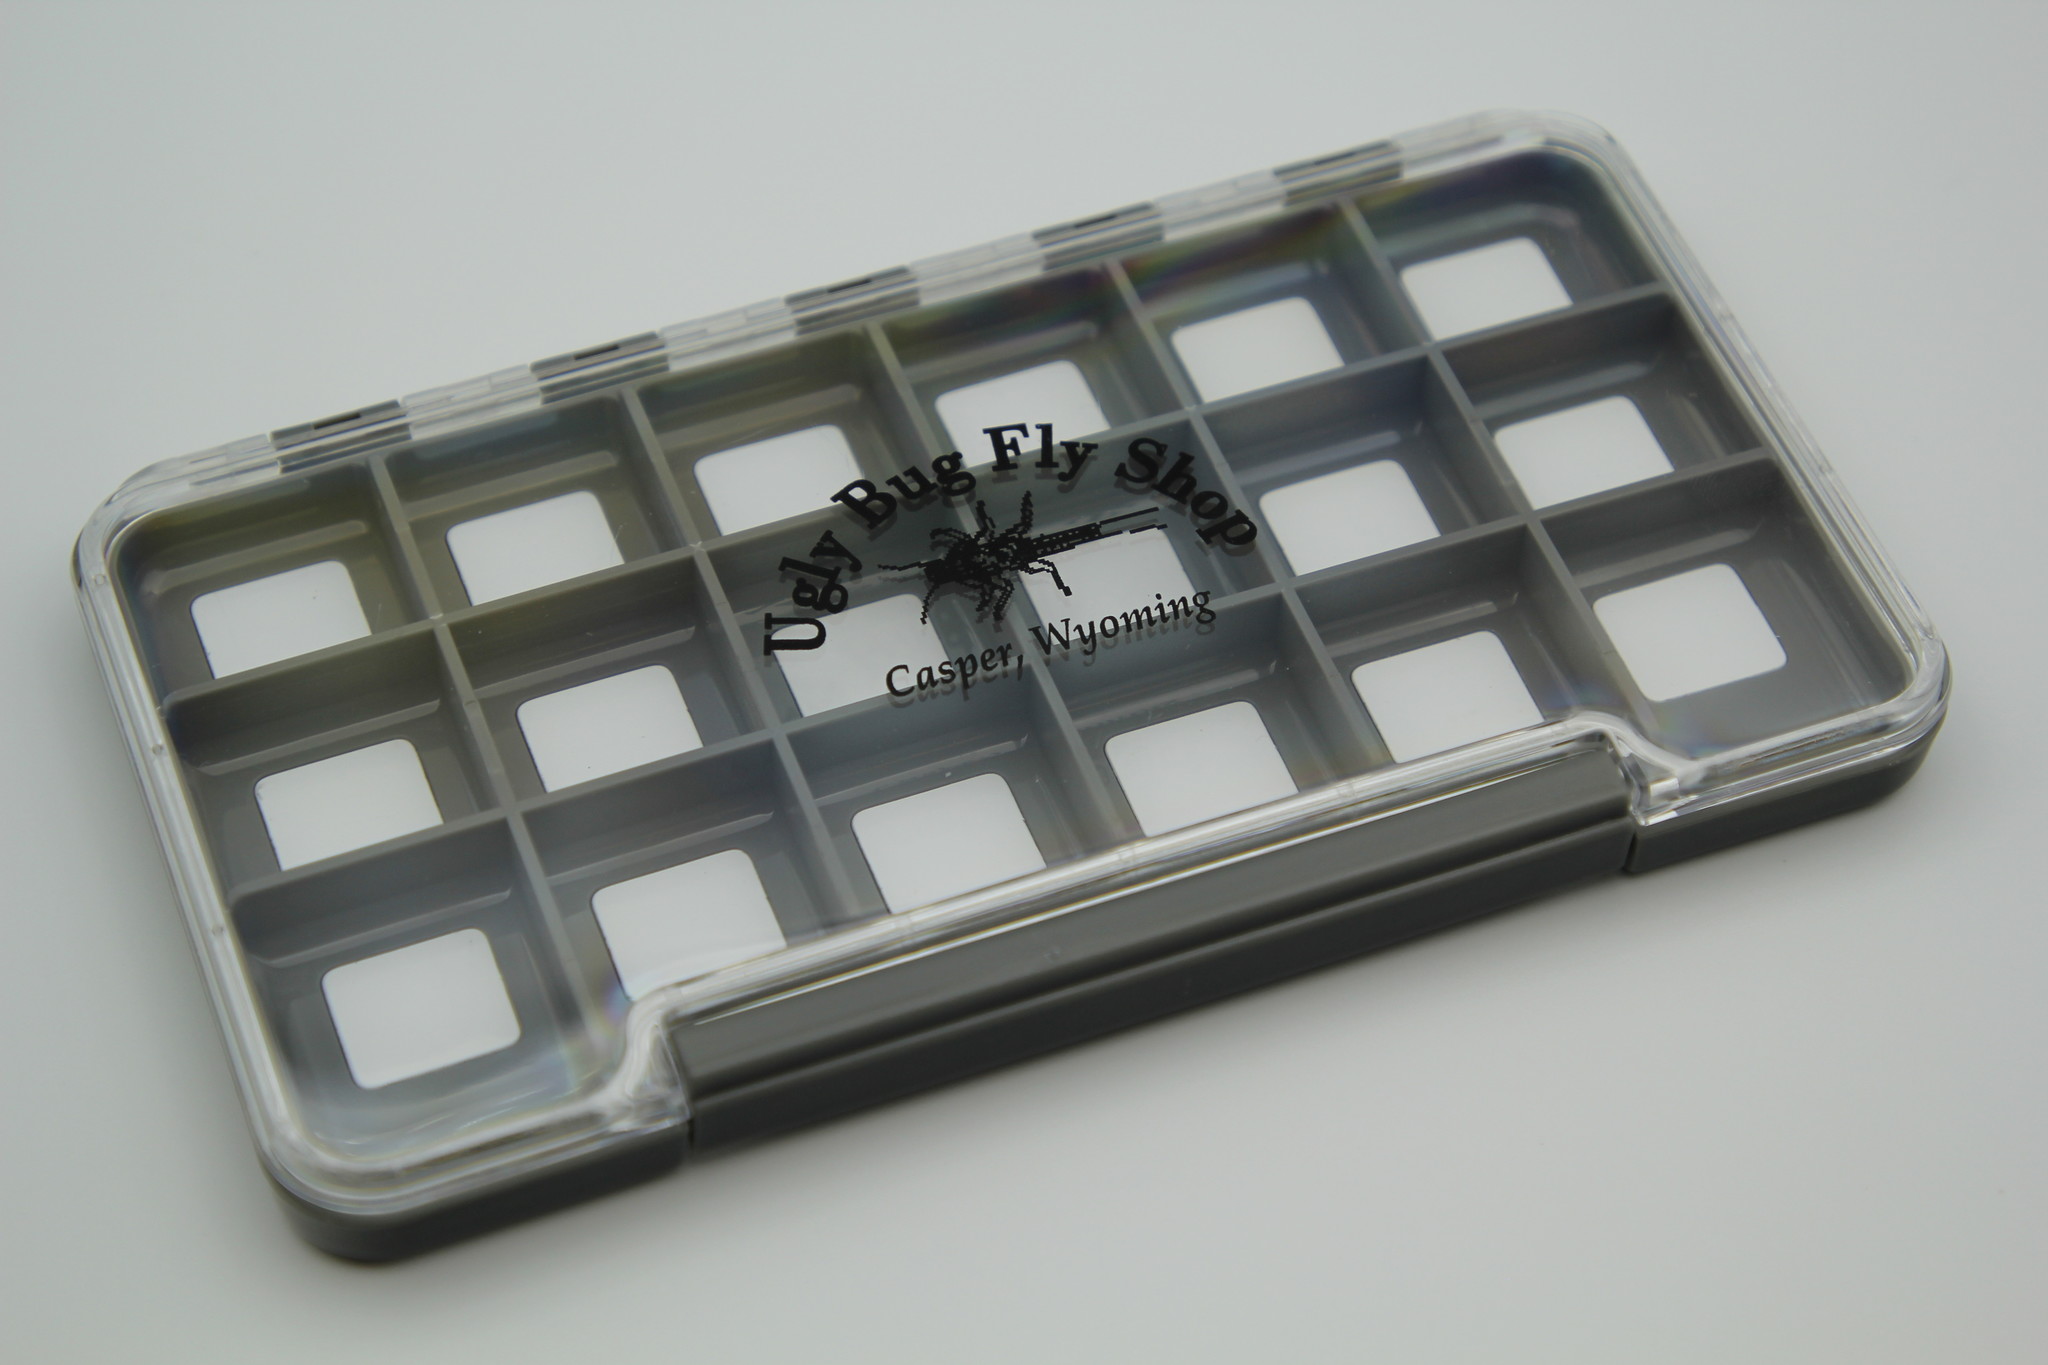 Large Clear 18 Compartment Fly Box Details about   3 Pack 